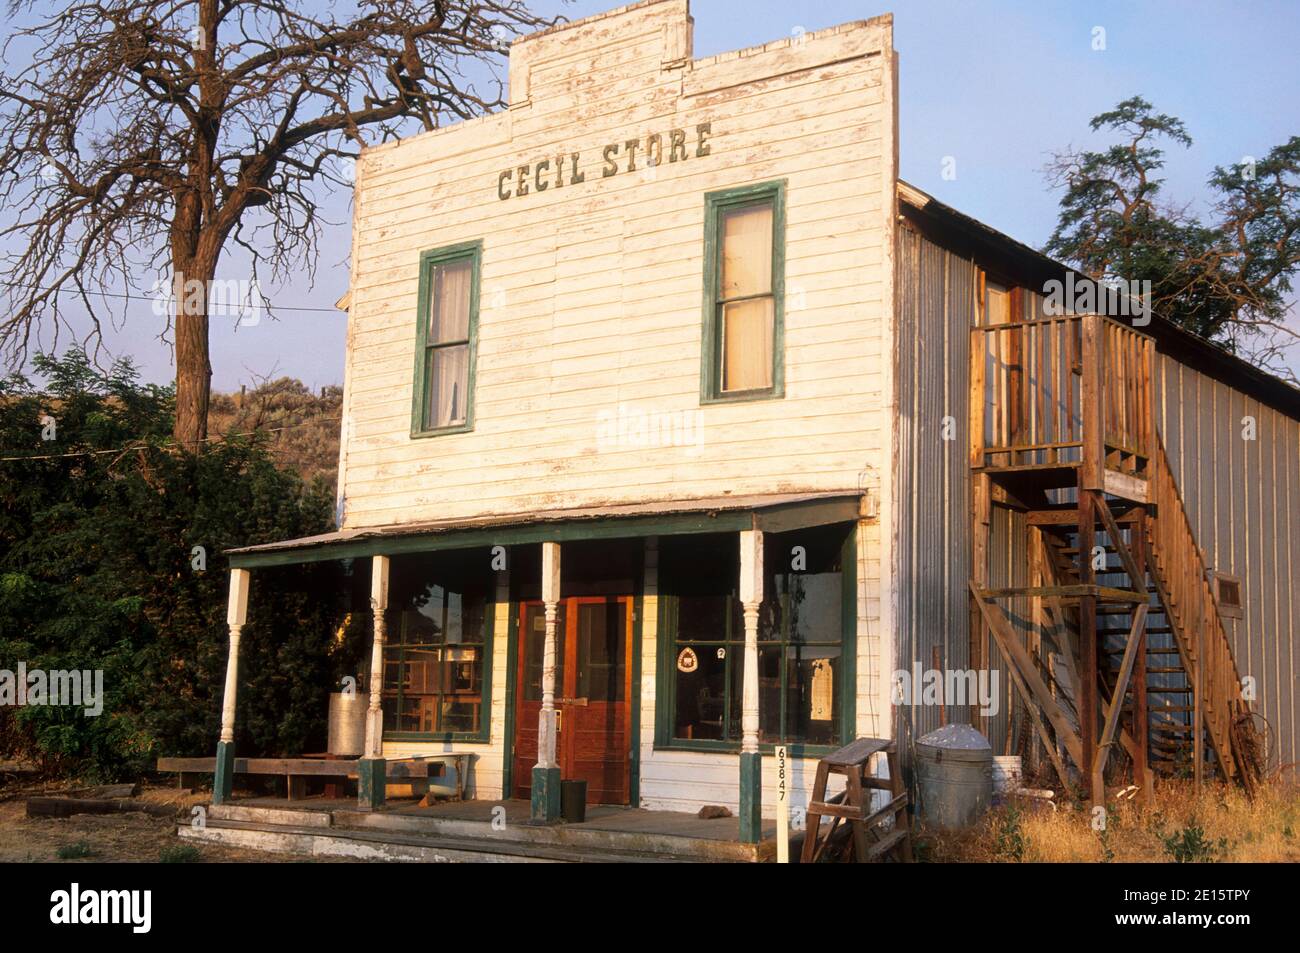 Cecil Store, Blue Mountain National Scenic Byway, Cecil, Oregon Stock Photo  - Alamy